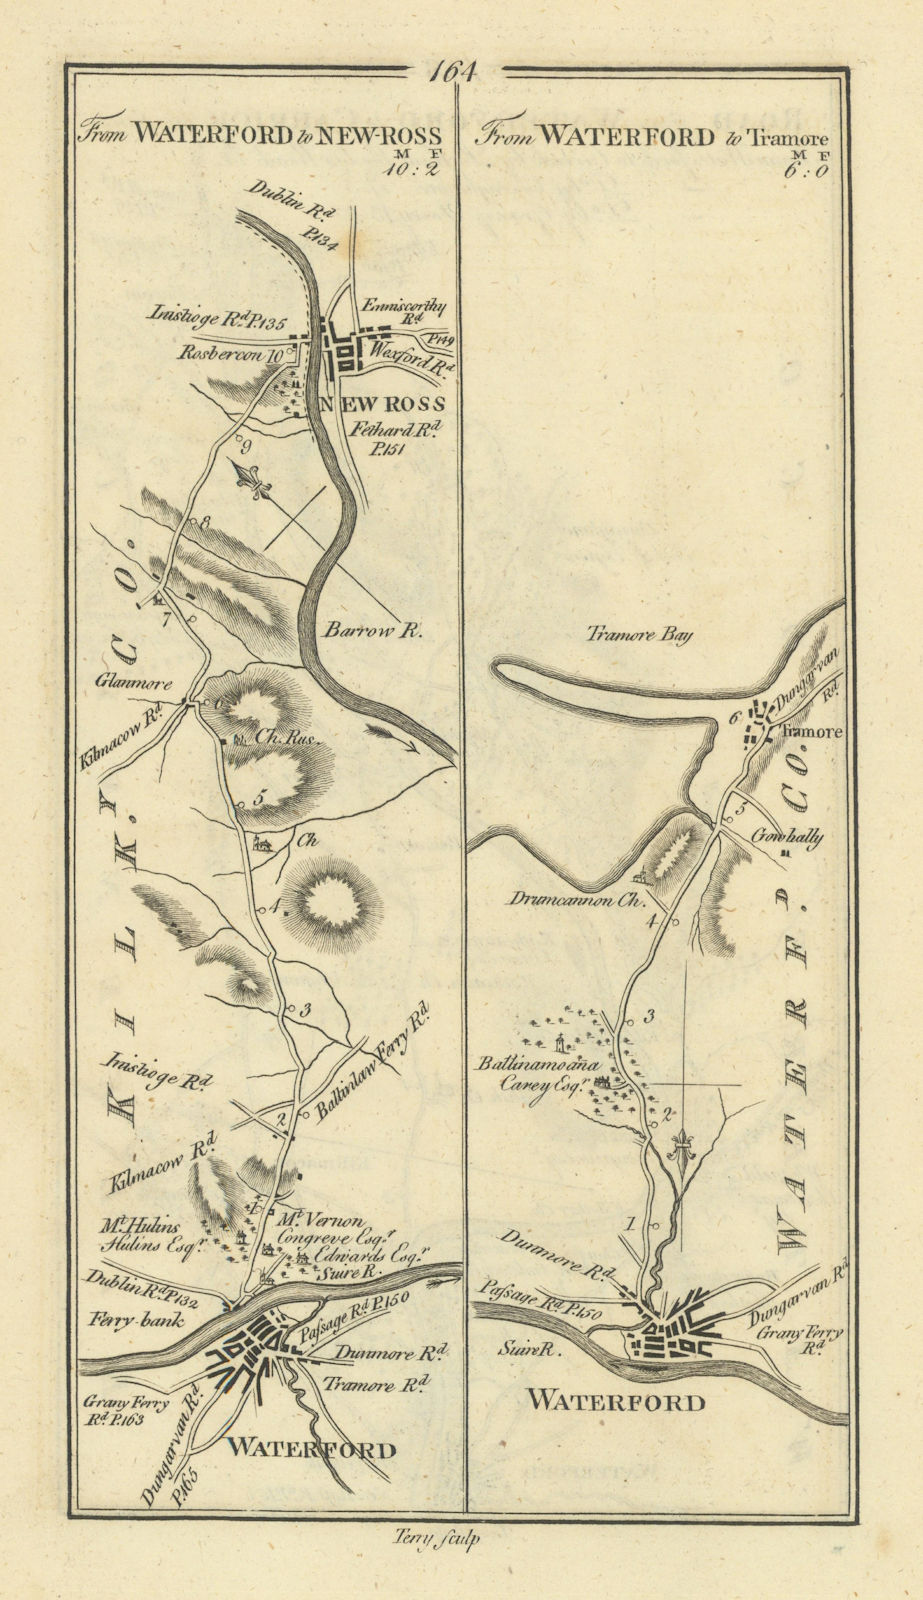 Associate Product #164 From Waterford to New Ross & Tramore. Wexford. TAYLOR/SKINNER 1778 map